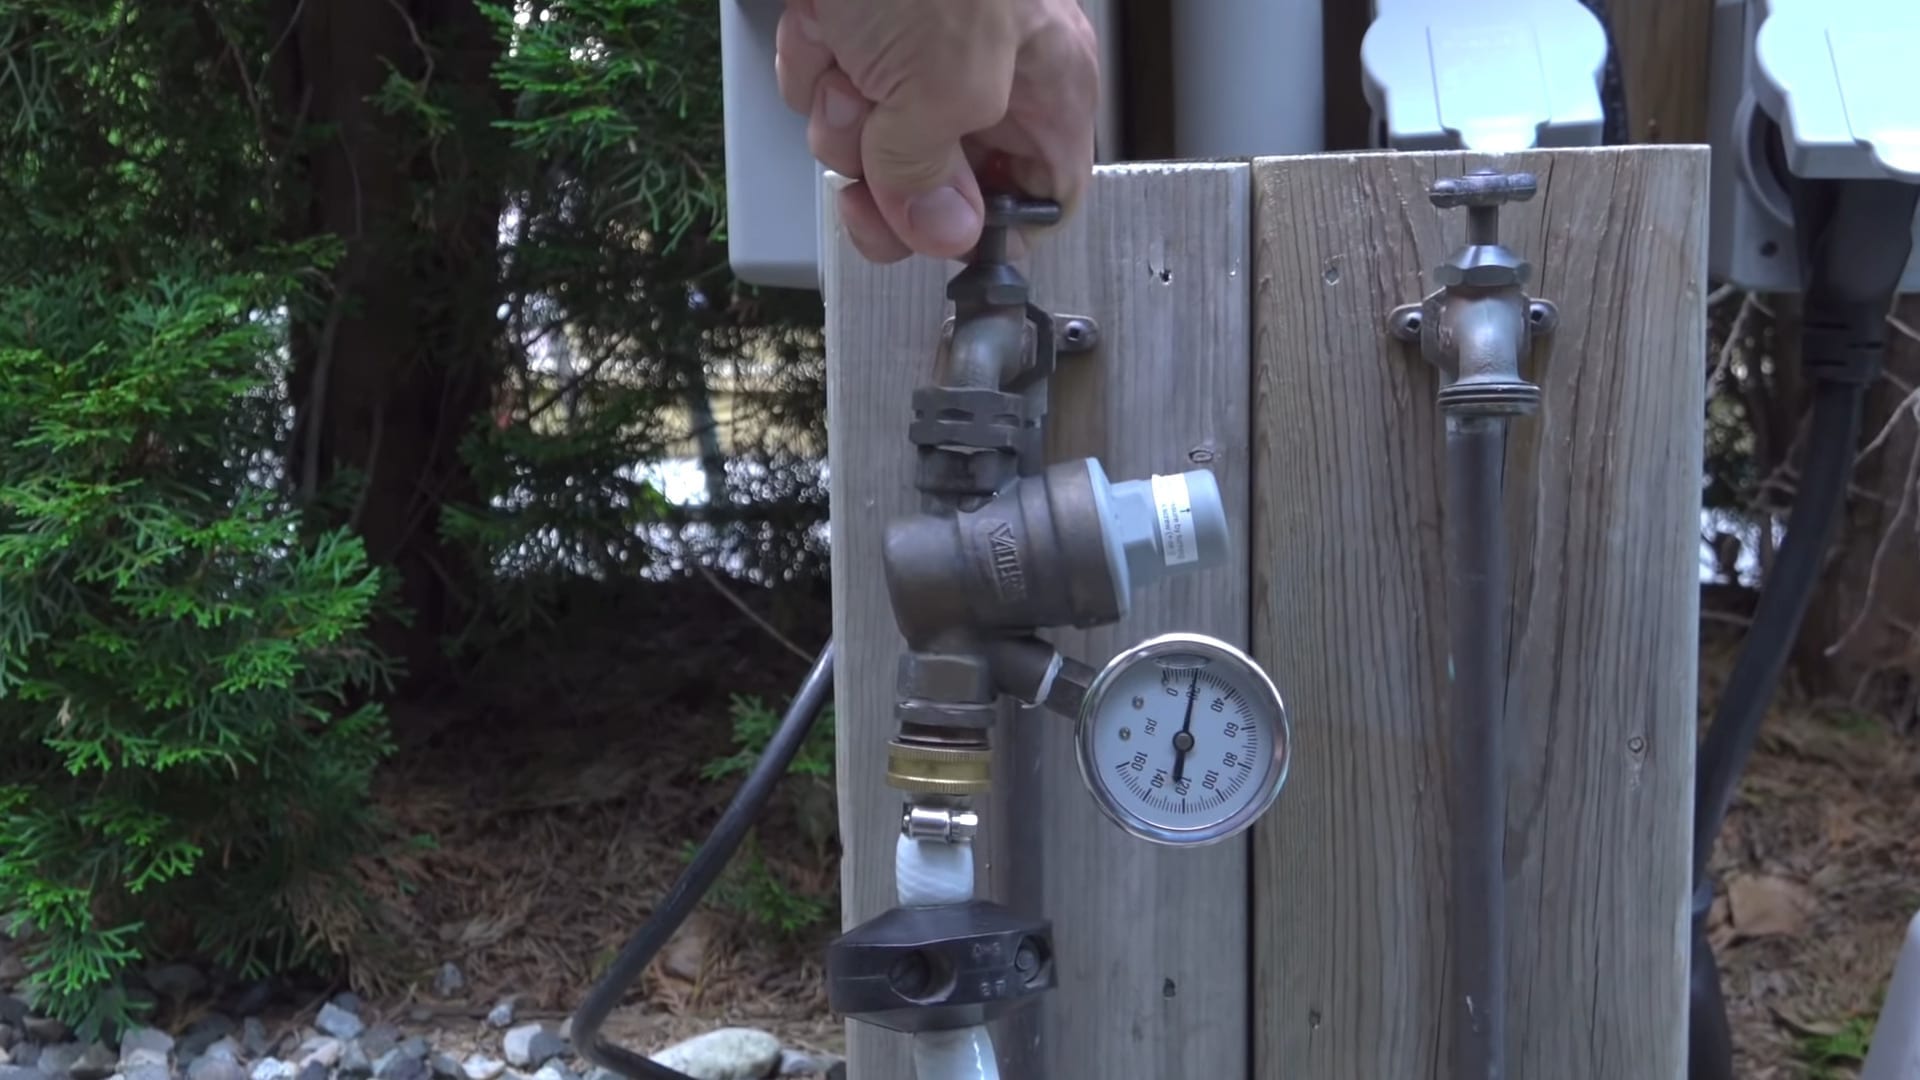 Connecting our RV plumbing system to a city water connection at an RV park